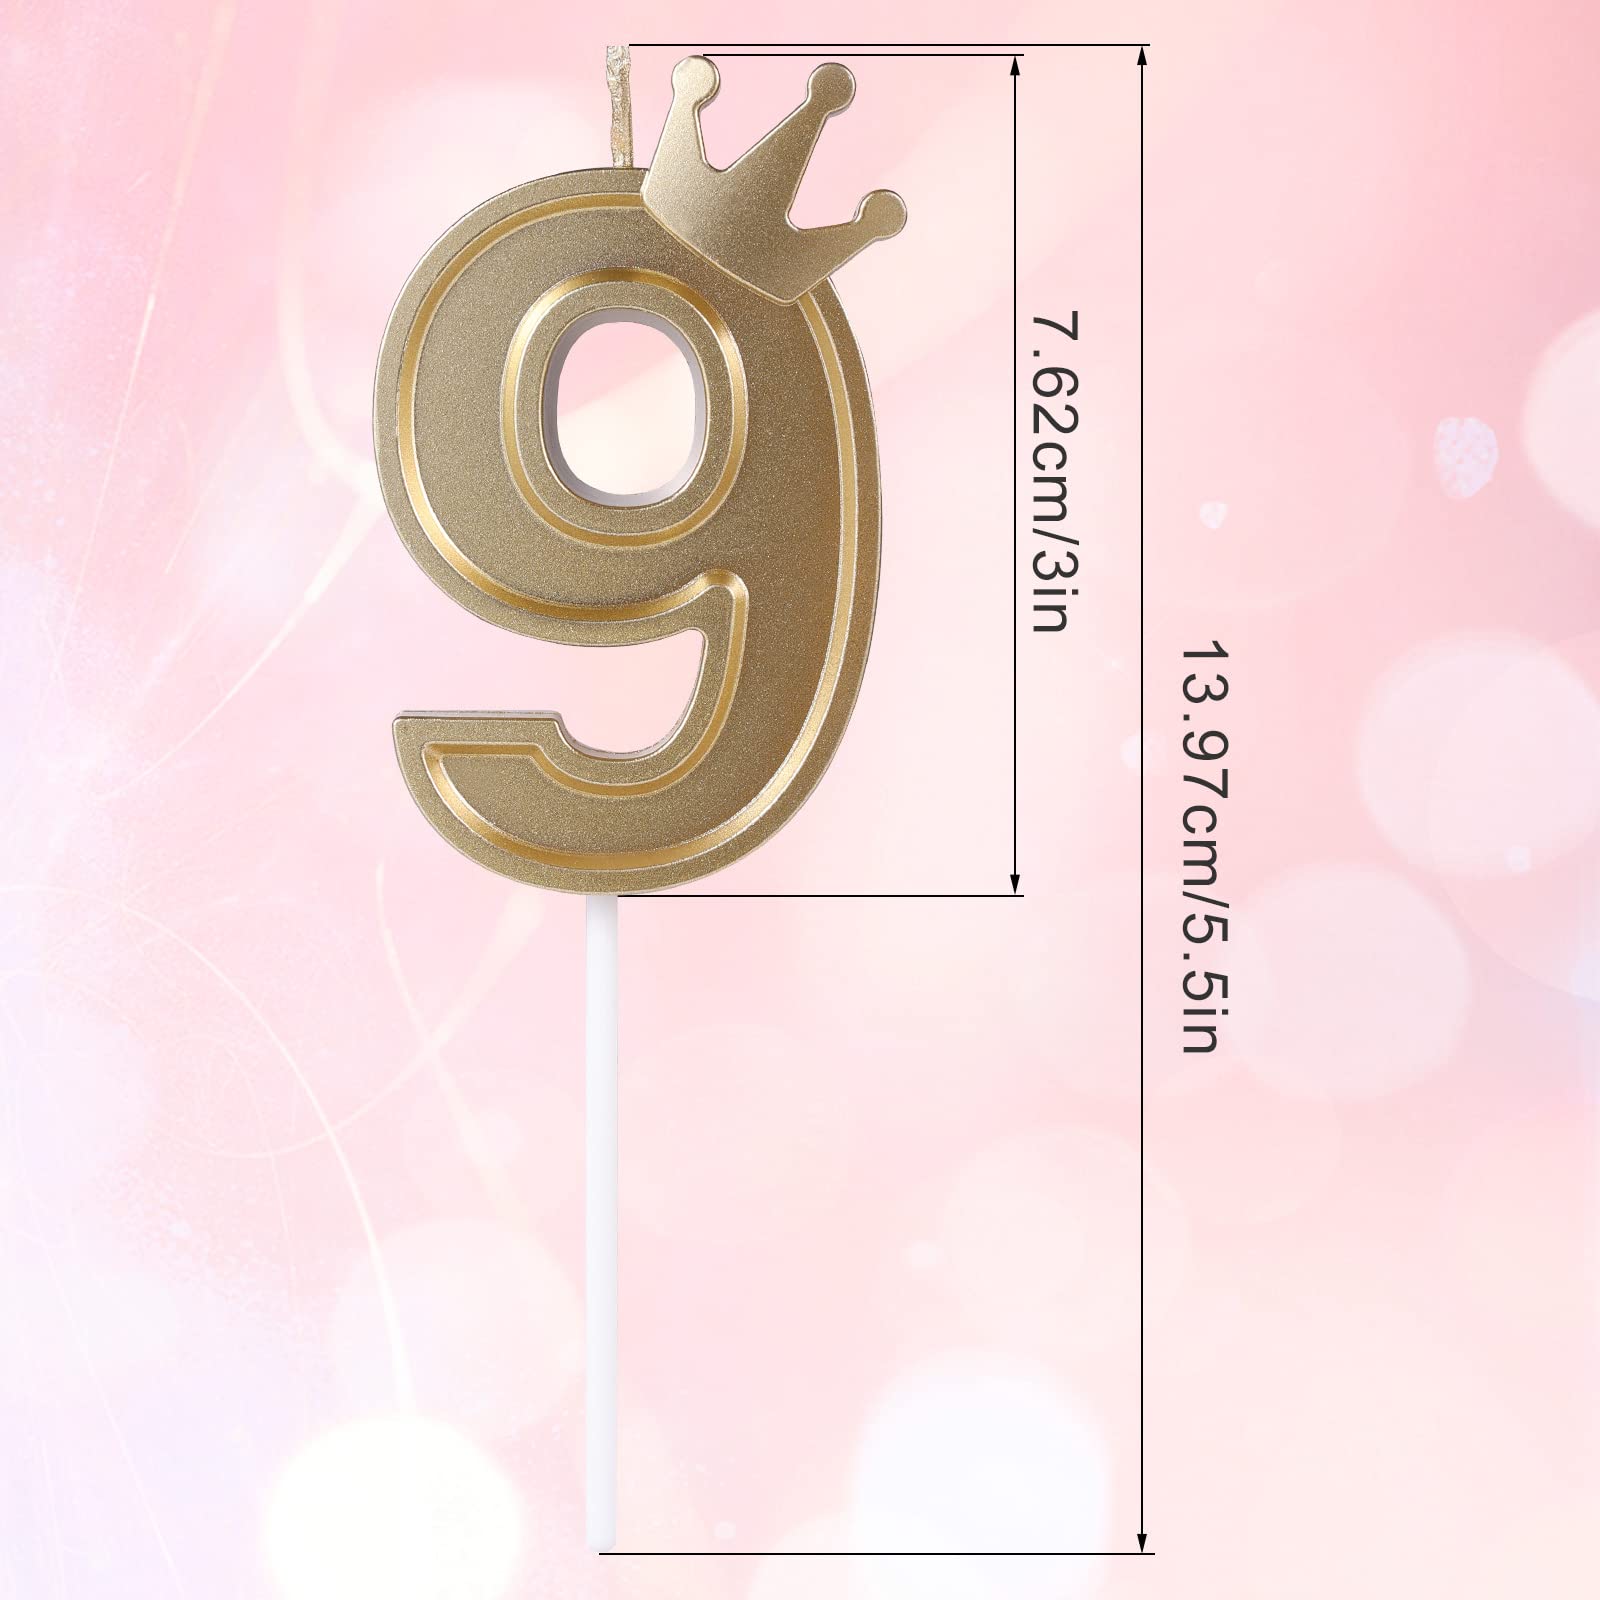 AIEX 3inch Birthday Number Candle, 3D Candle Cake Topper with Crown Cake Numeral Candles Number Candles for Birthday Anniversary Parties (Gold; 9)